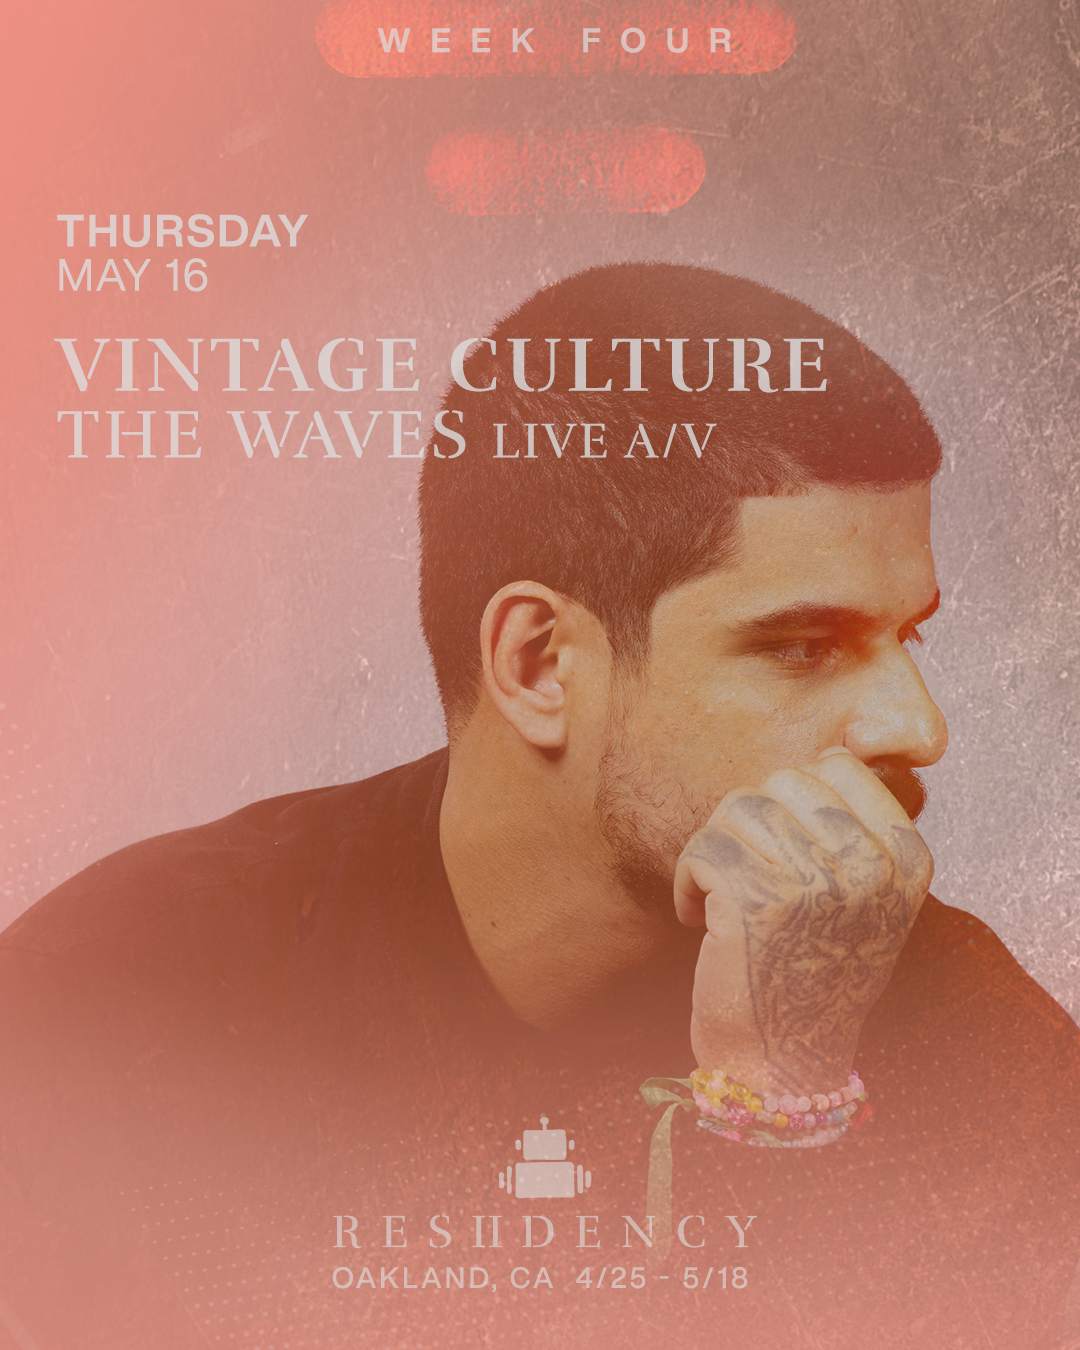 Robot Heart RESIIDENCY - Show 14 - Vintage Culture - The WAVES Live - フライヤー表